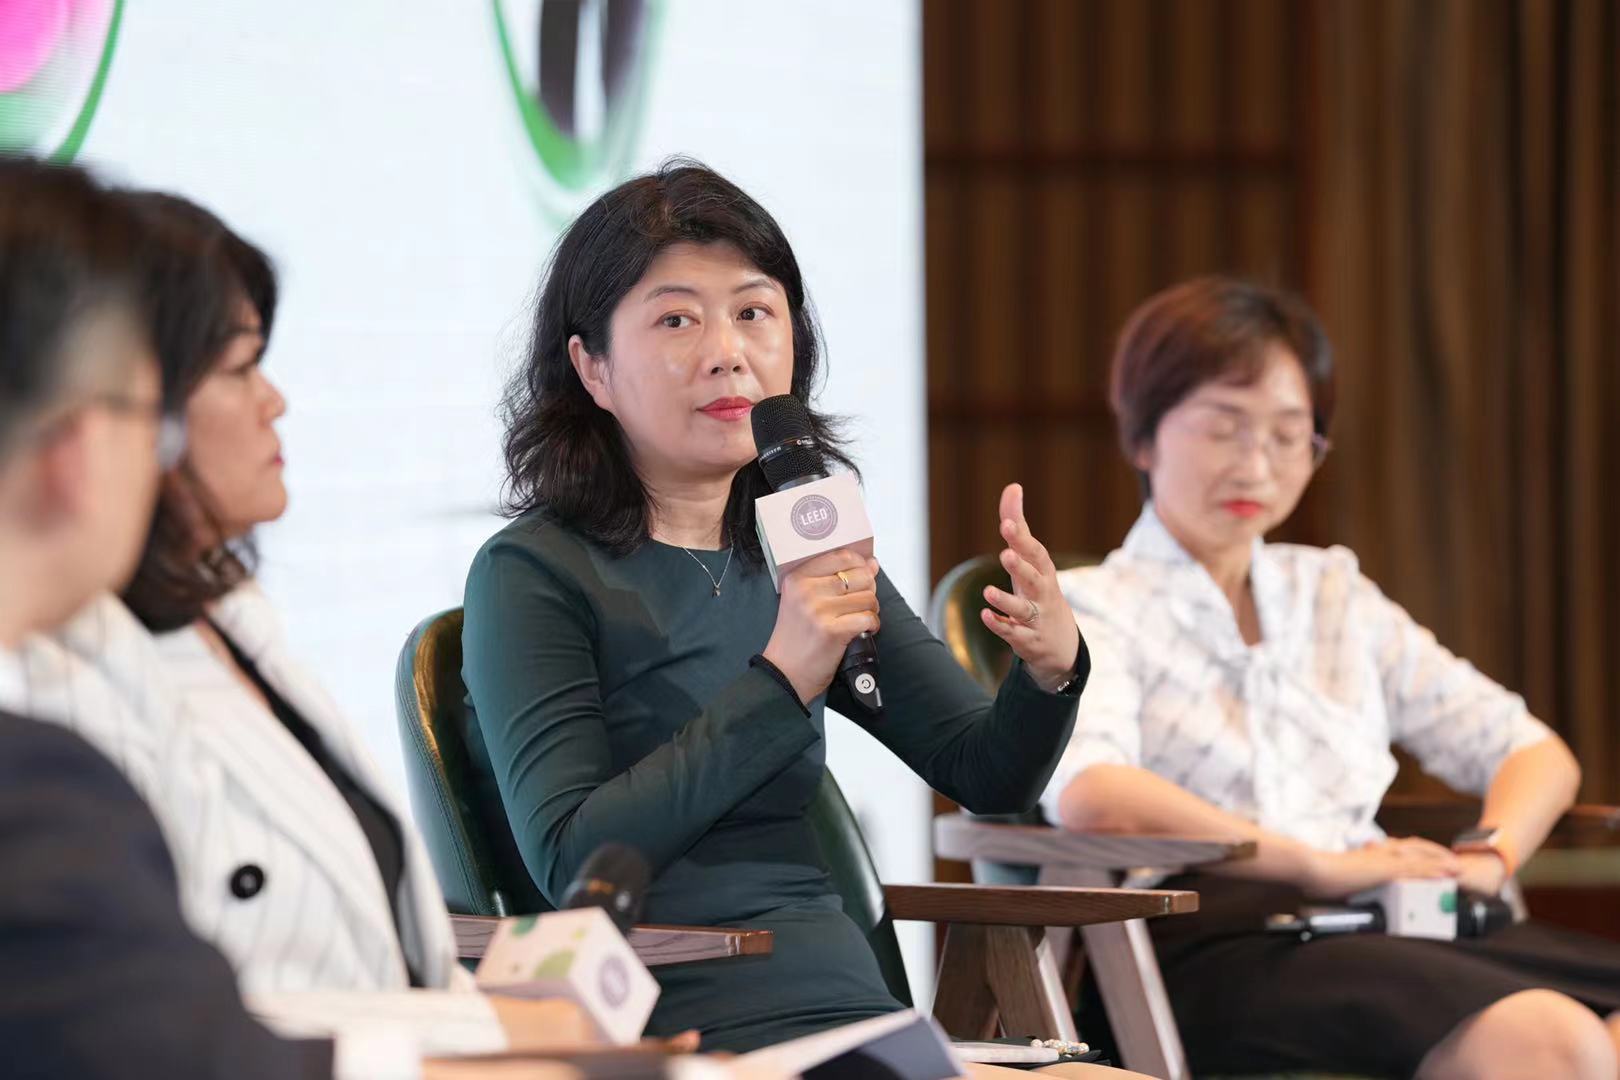 Dou Zhang sits on stage with three other panelists and a microphone in her hand, speaking